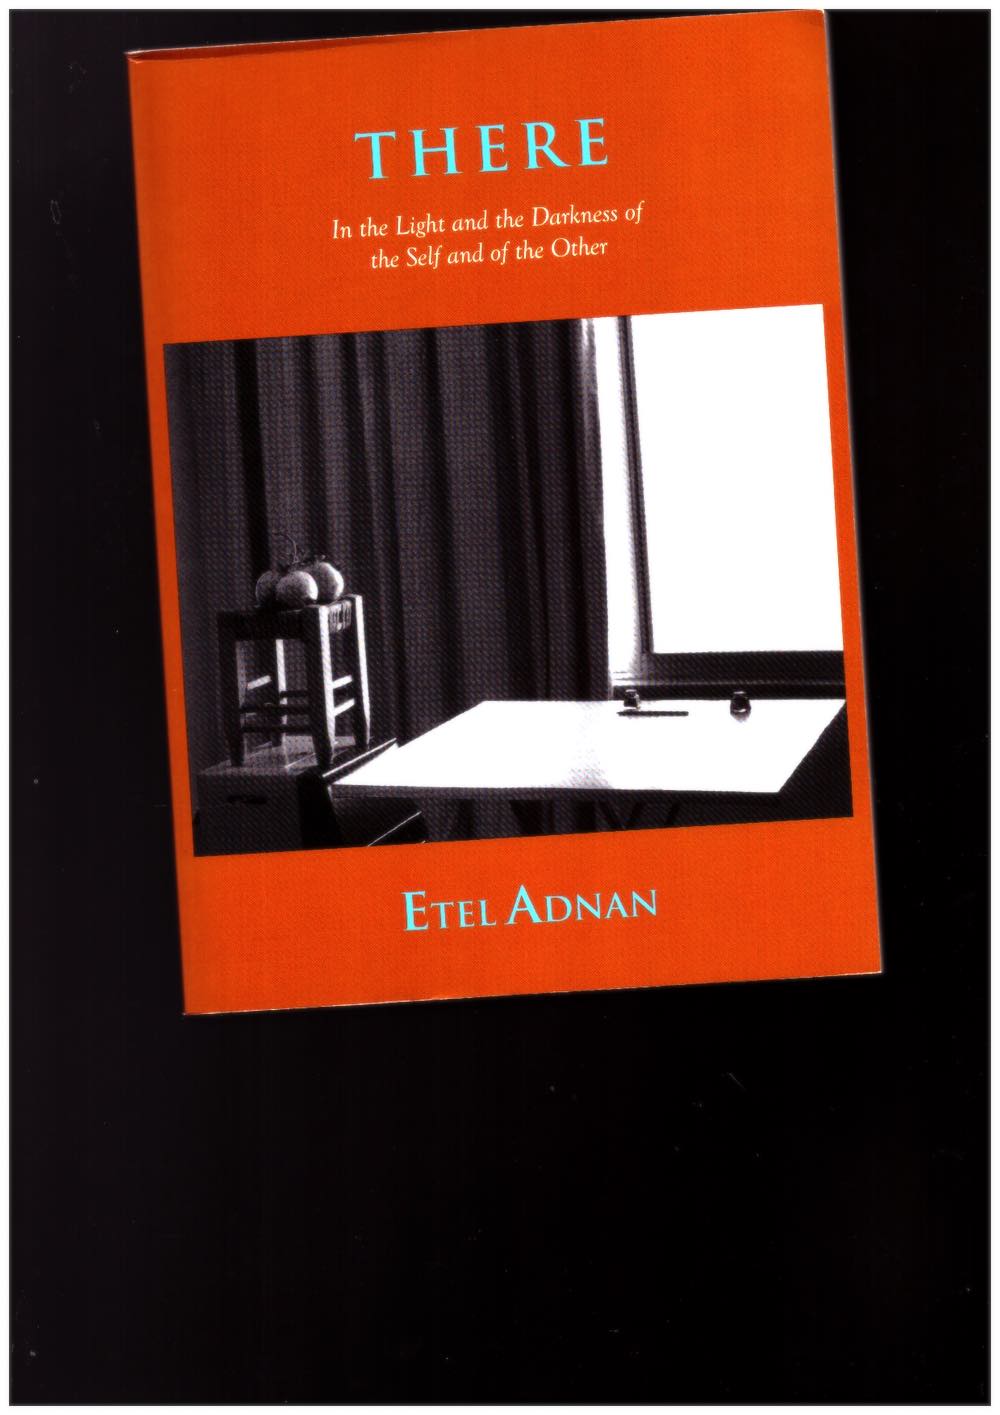 ADNAN, Etel - There: In the Light and the Darkness of the Self and of the Other